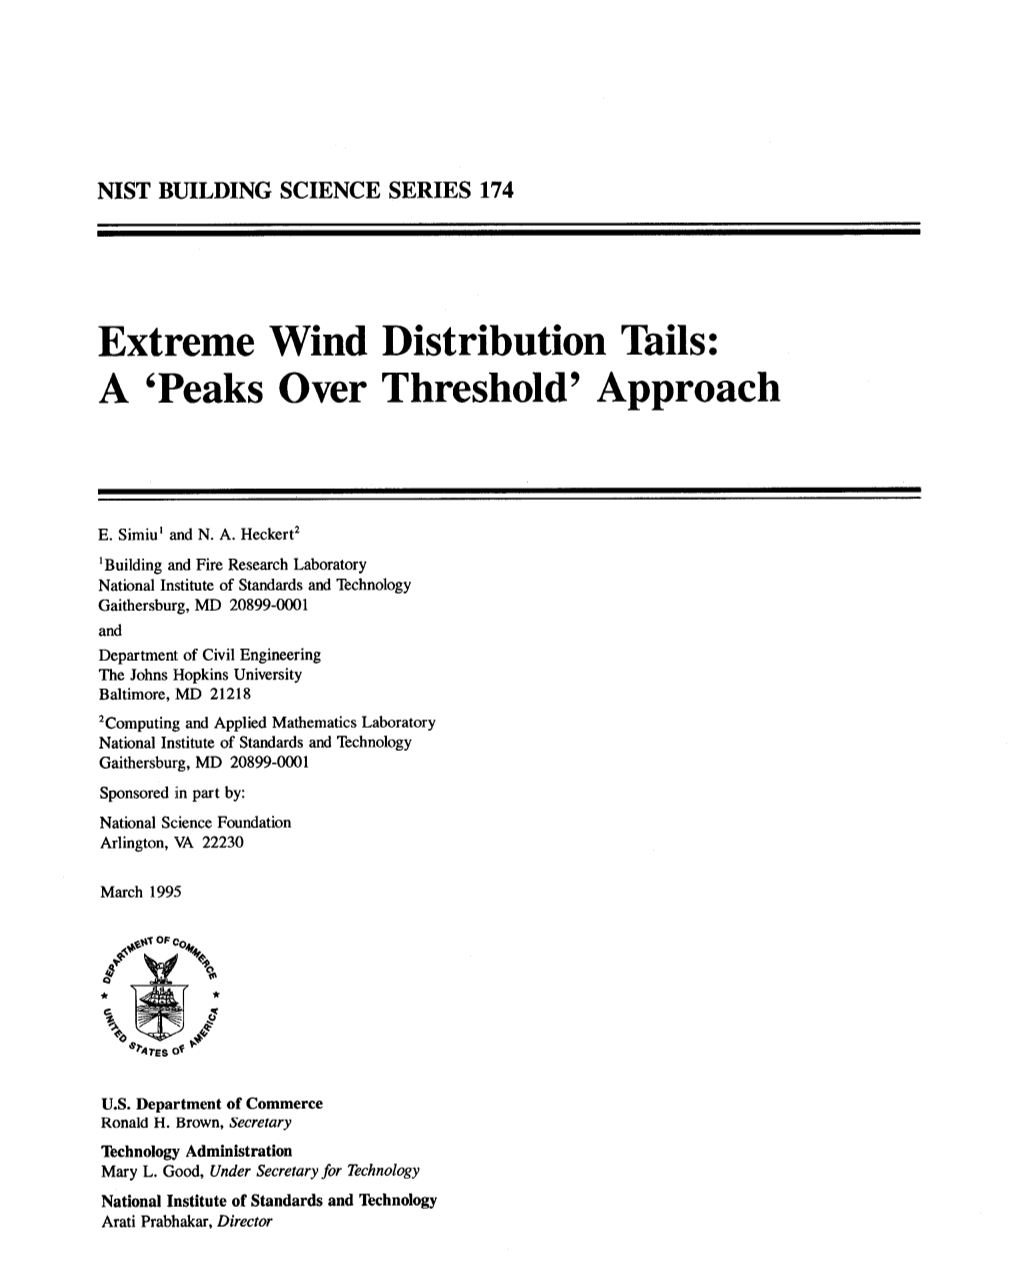 Extreme Wind Distribution Tails: a 'Peaks Over Threshold' Approach